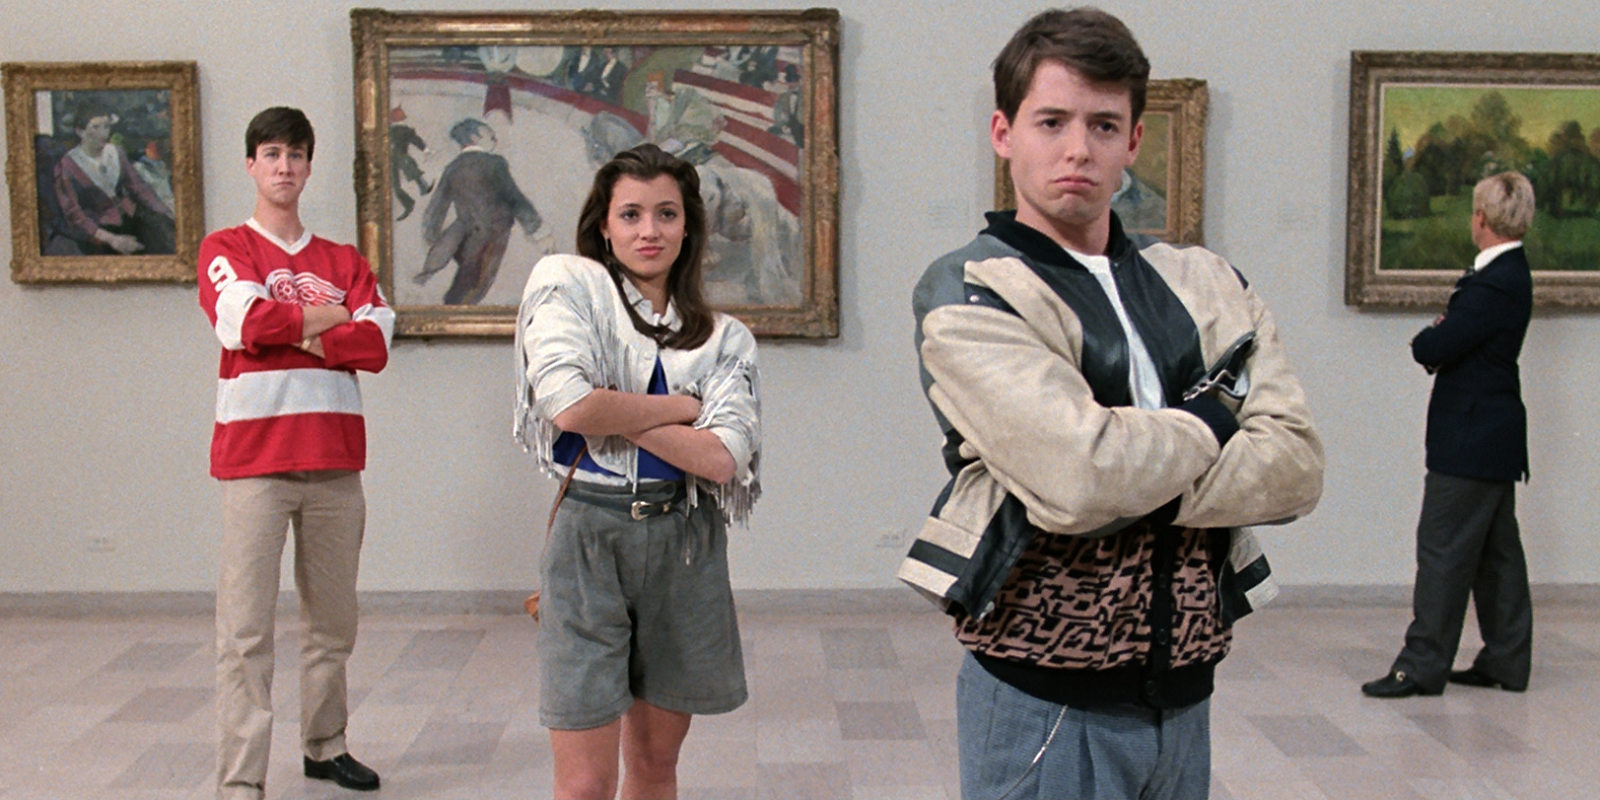 The Cast of Ferris Bueller's Day Off imitates art in a gallery 